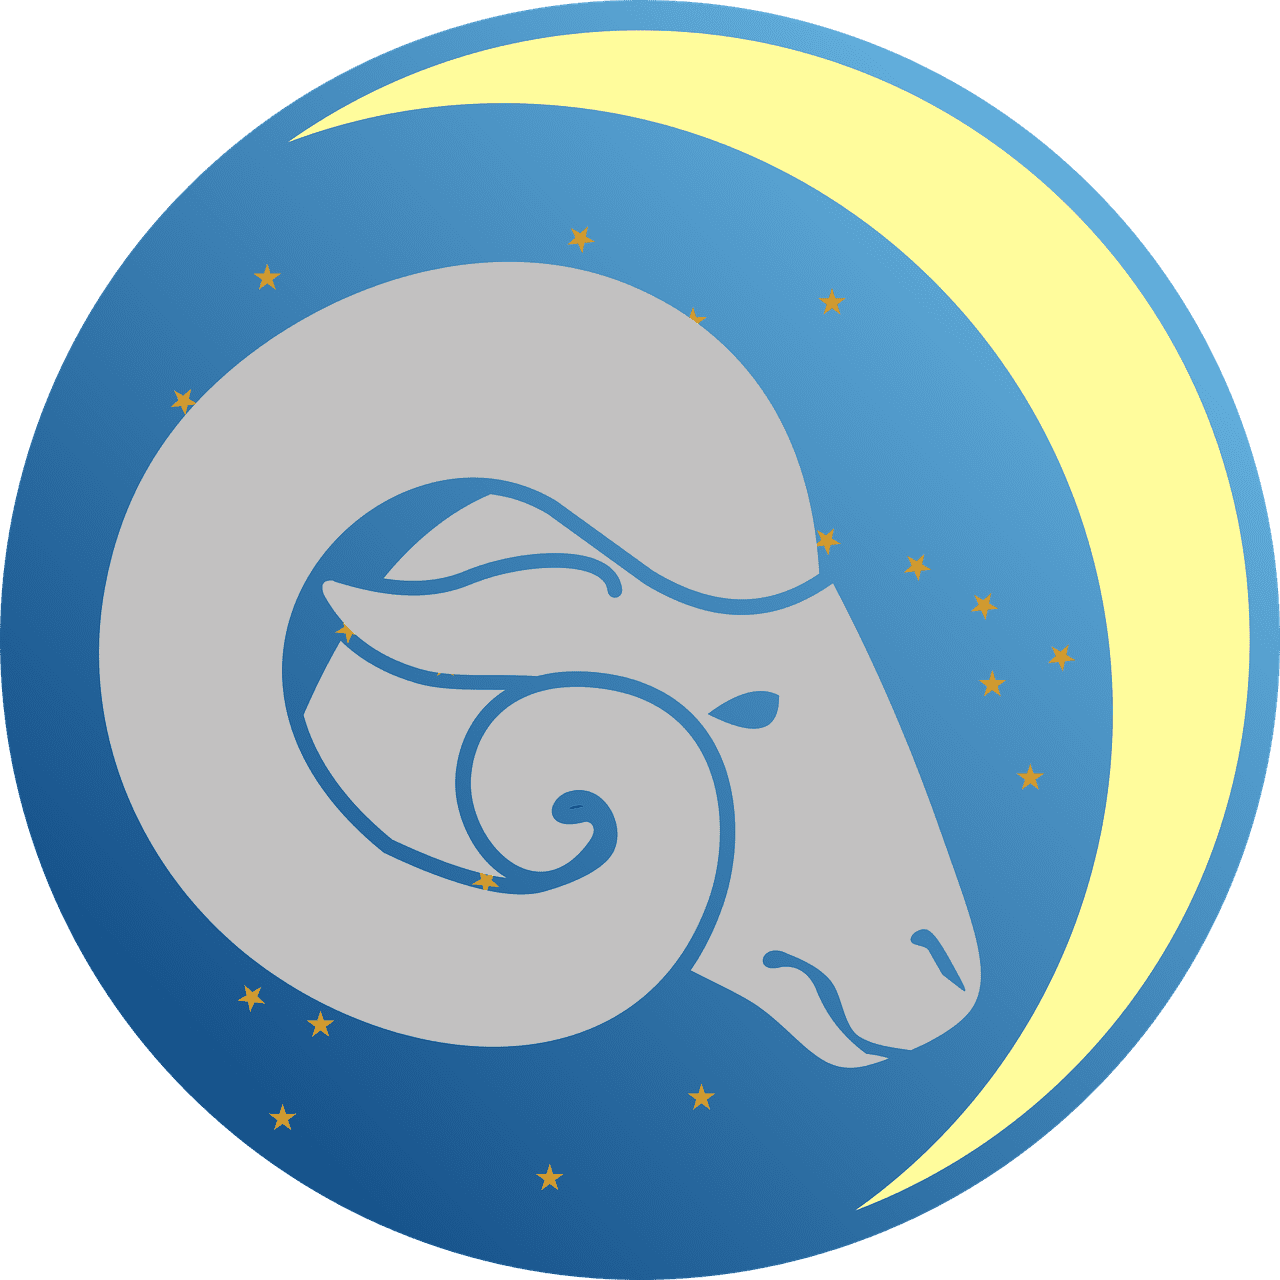 A depiction of the Aries star sign | Photo: Pixabay/13smok